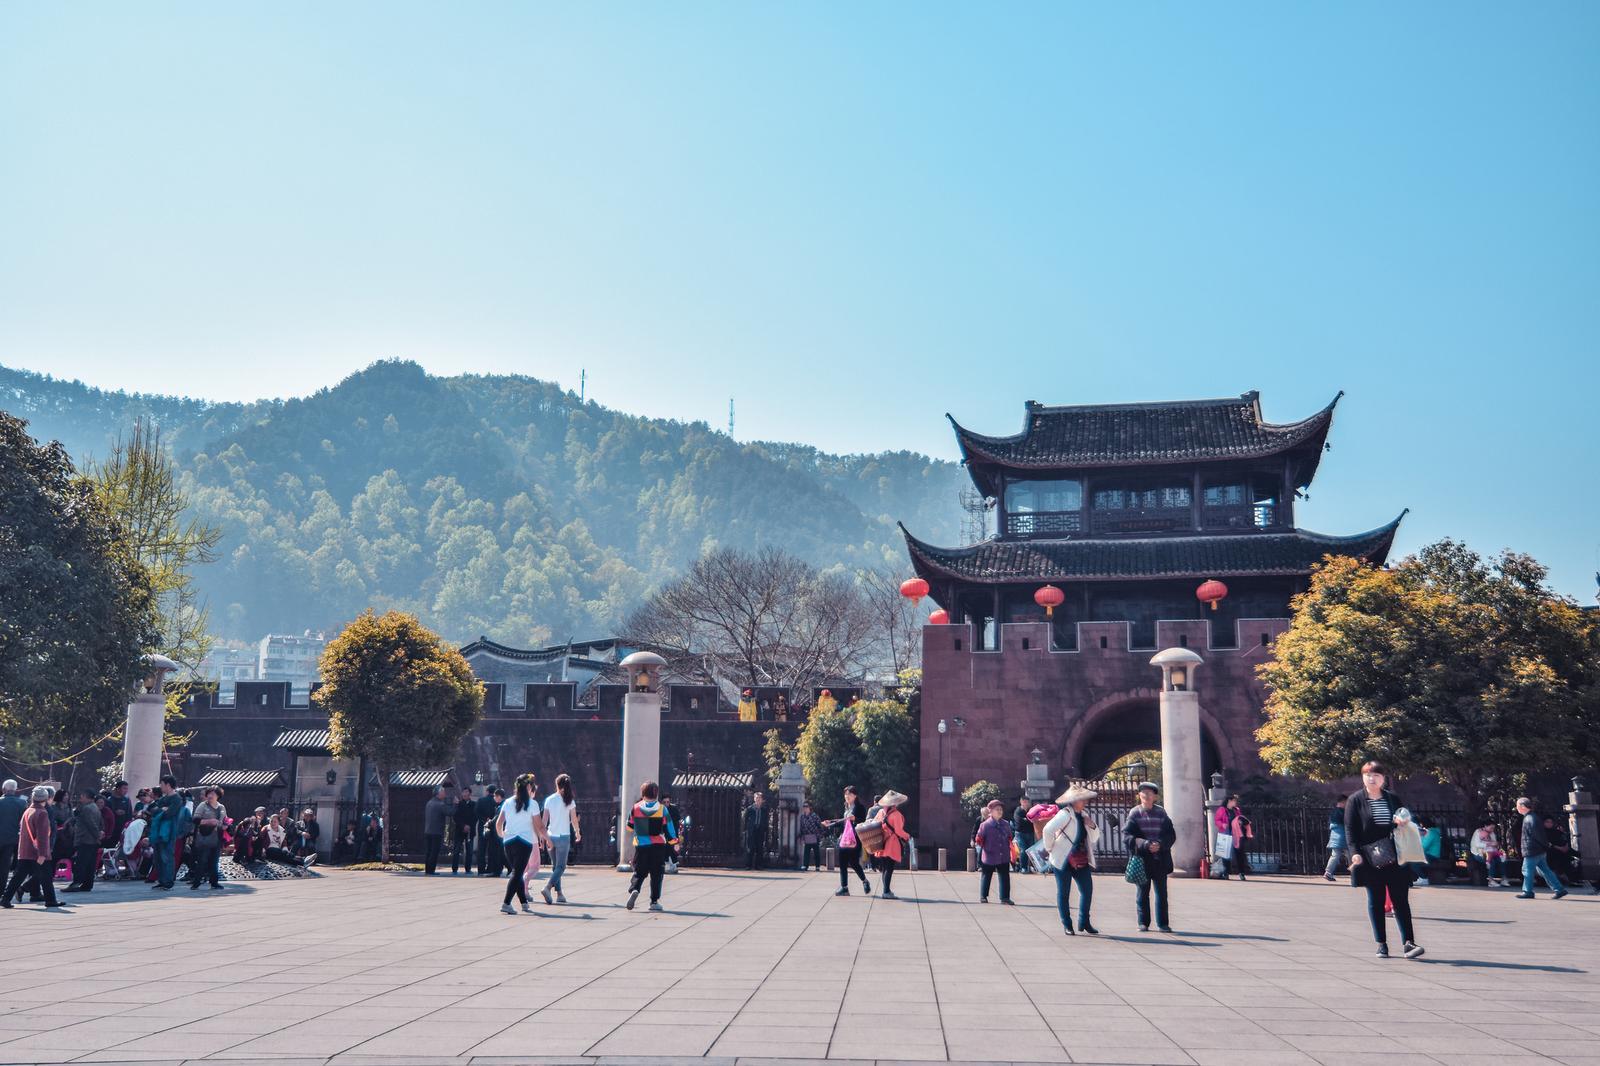 Culture Square and Fenghuang West Gate